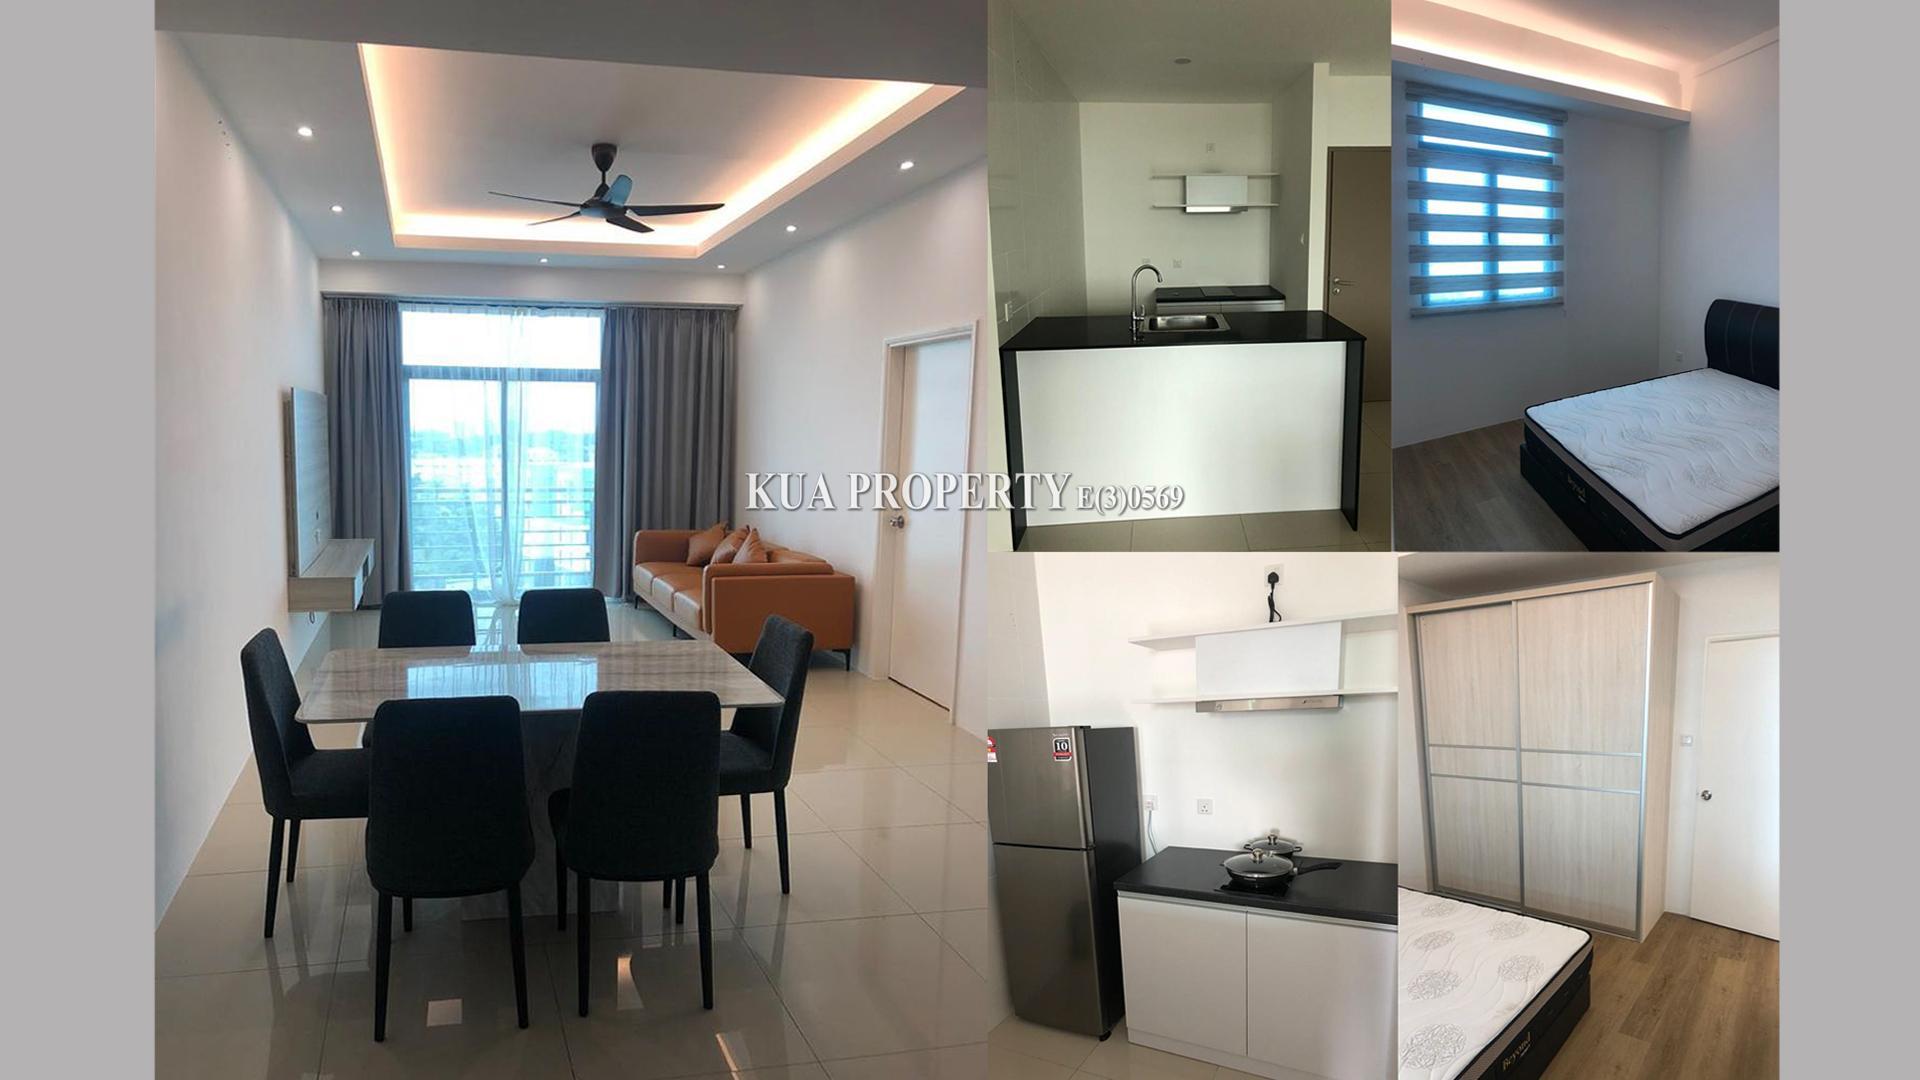 Laticube Apartment For sale ! Located at Jalan Burung Lilin